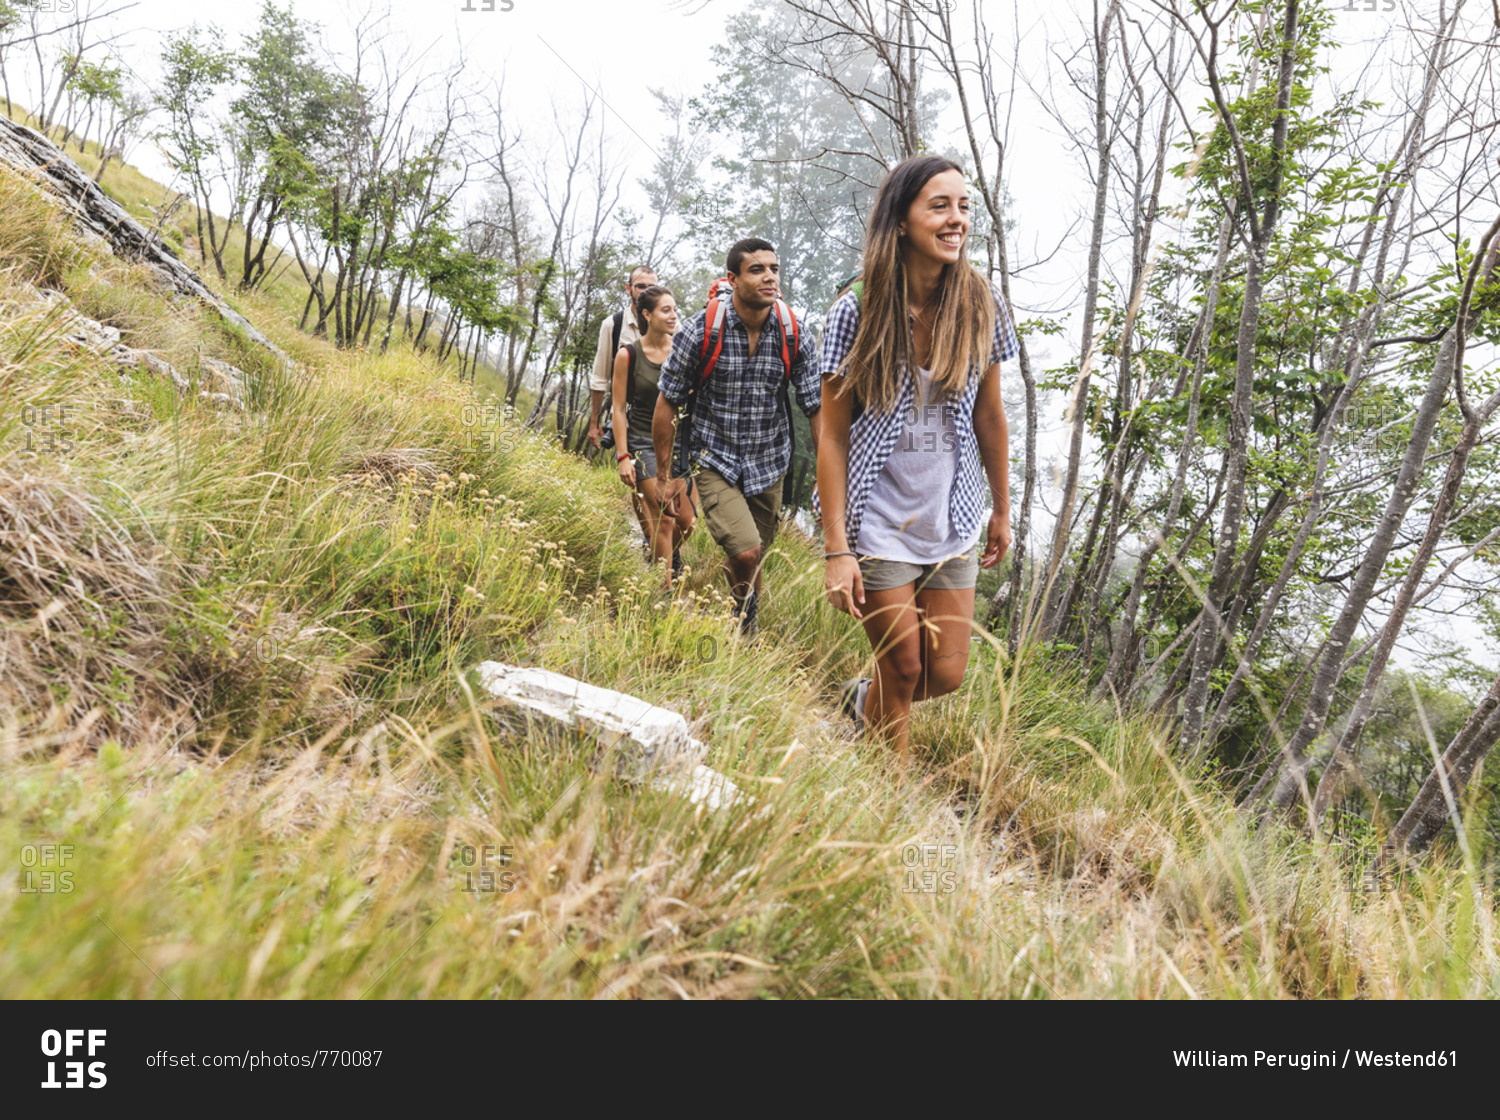 Italy- Massa- group of young people hiking in the Alpi Apuane mountains